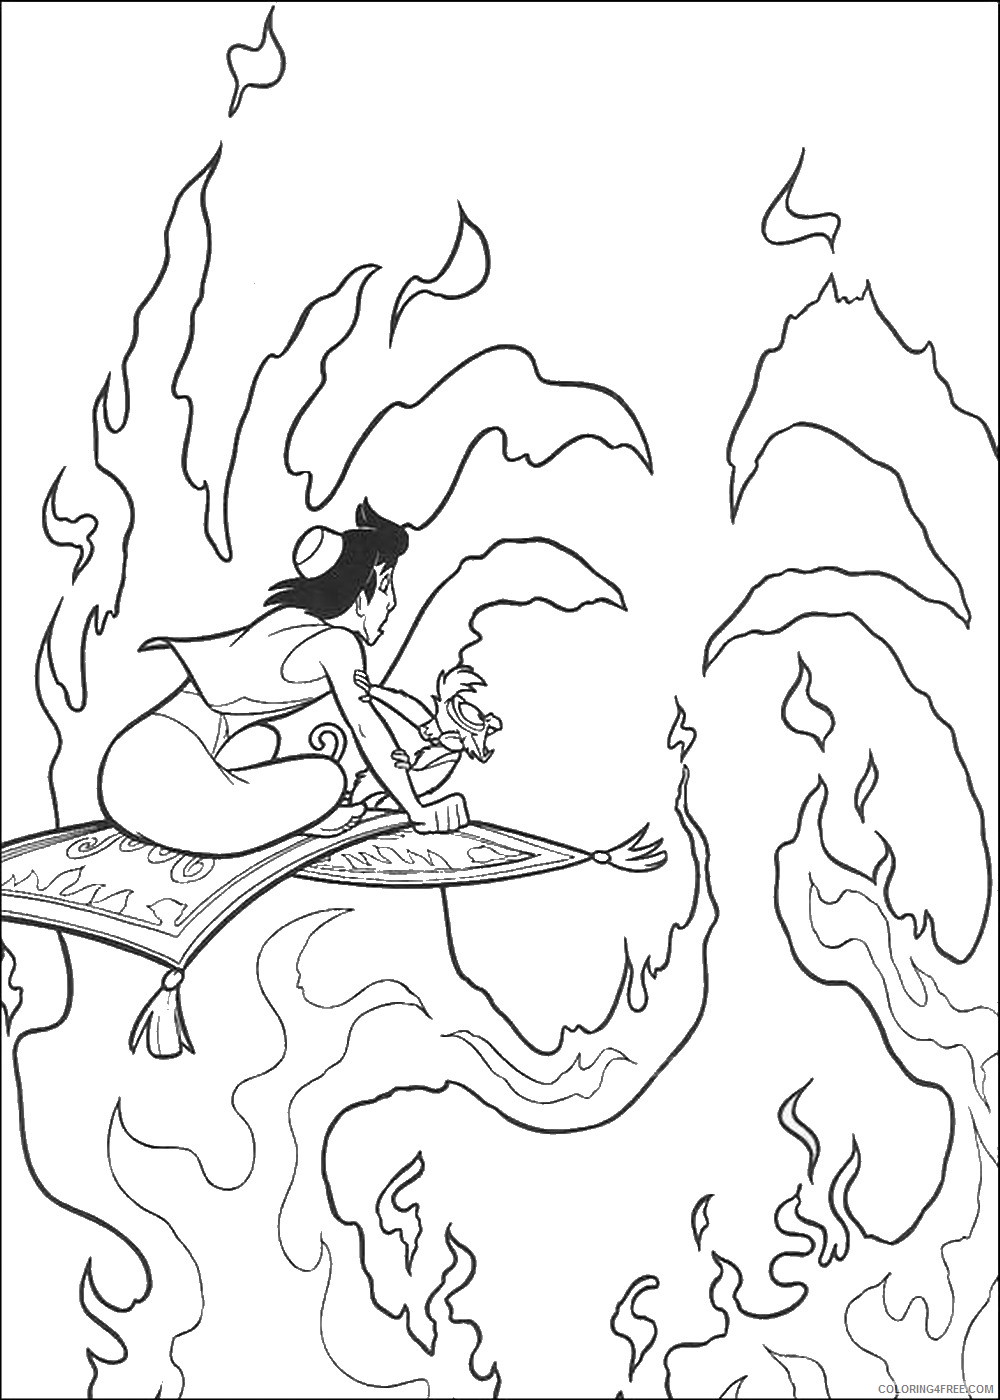 Aladdin Coloring Pages Cartoons aladdin_17 Printable 2020 0295 Coloring4free